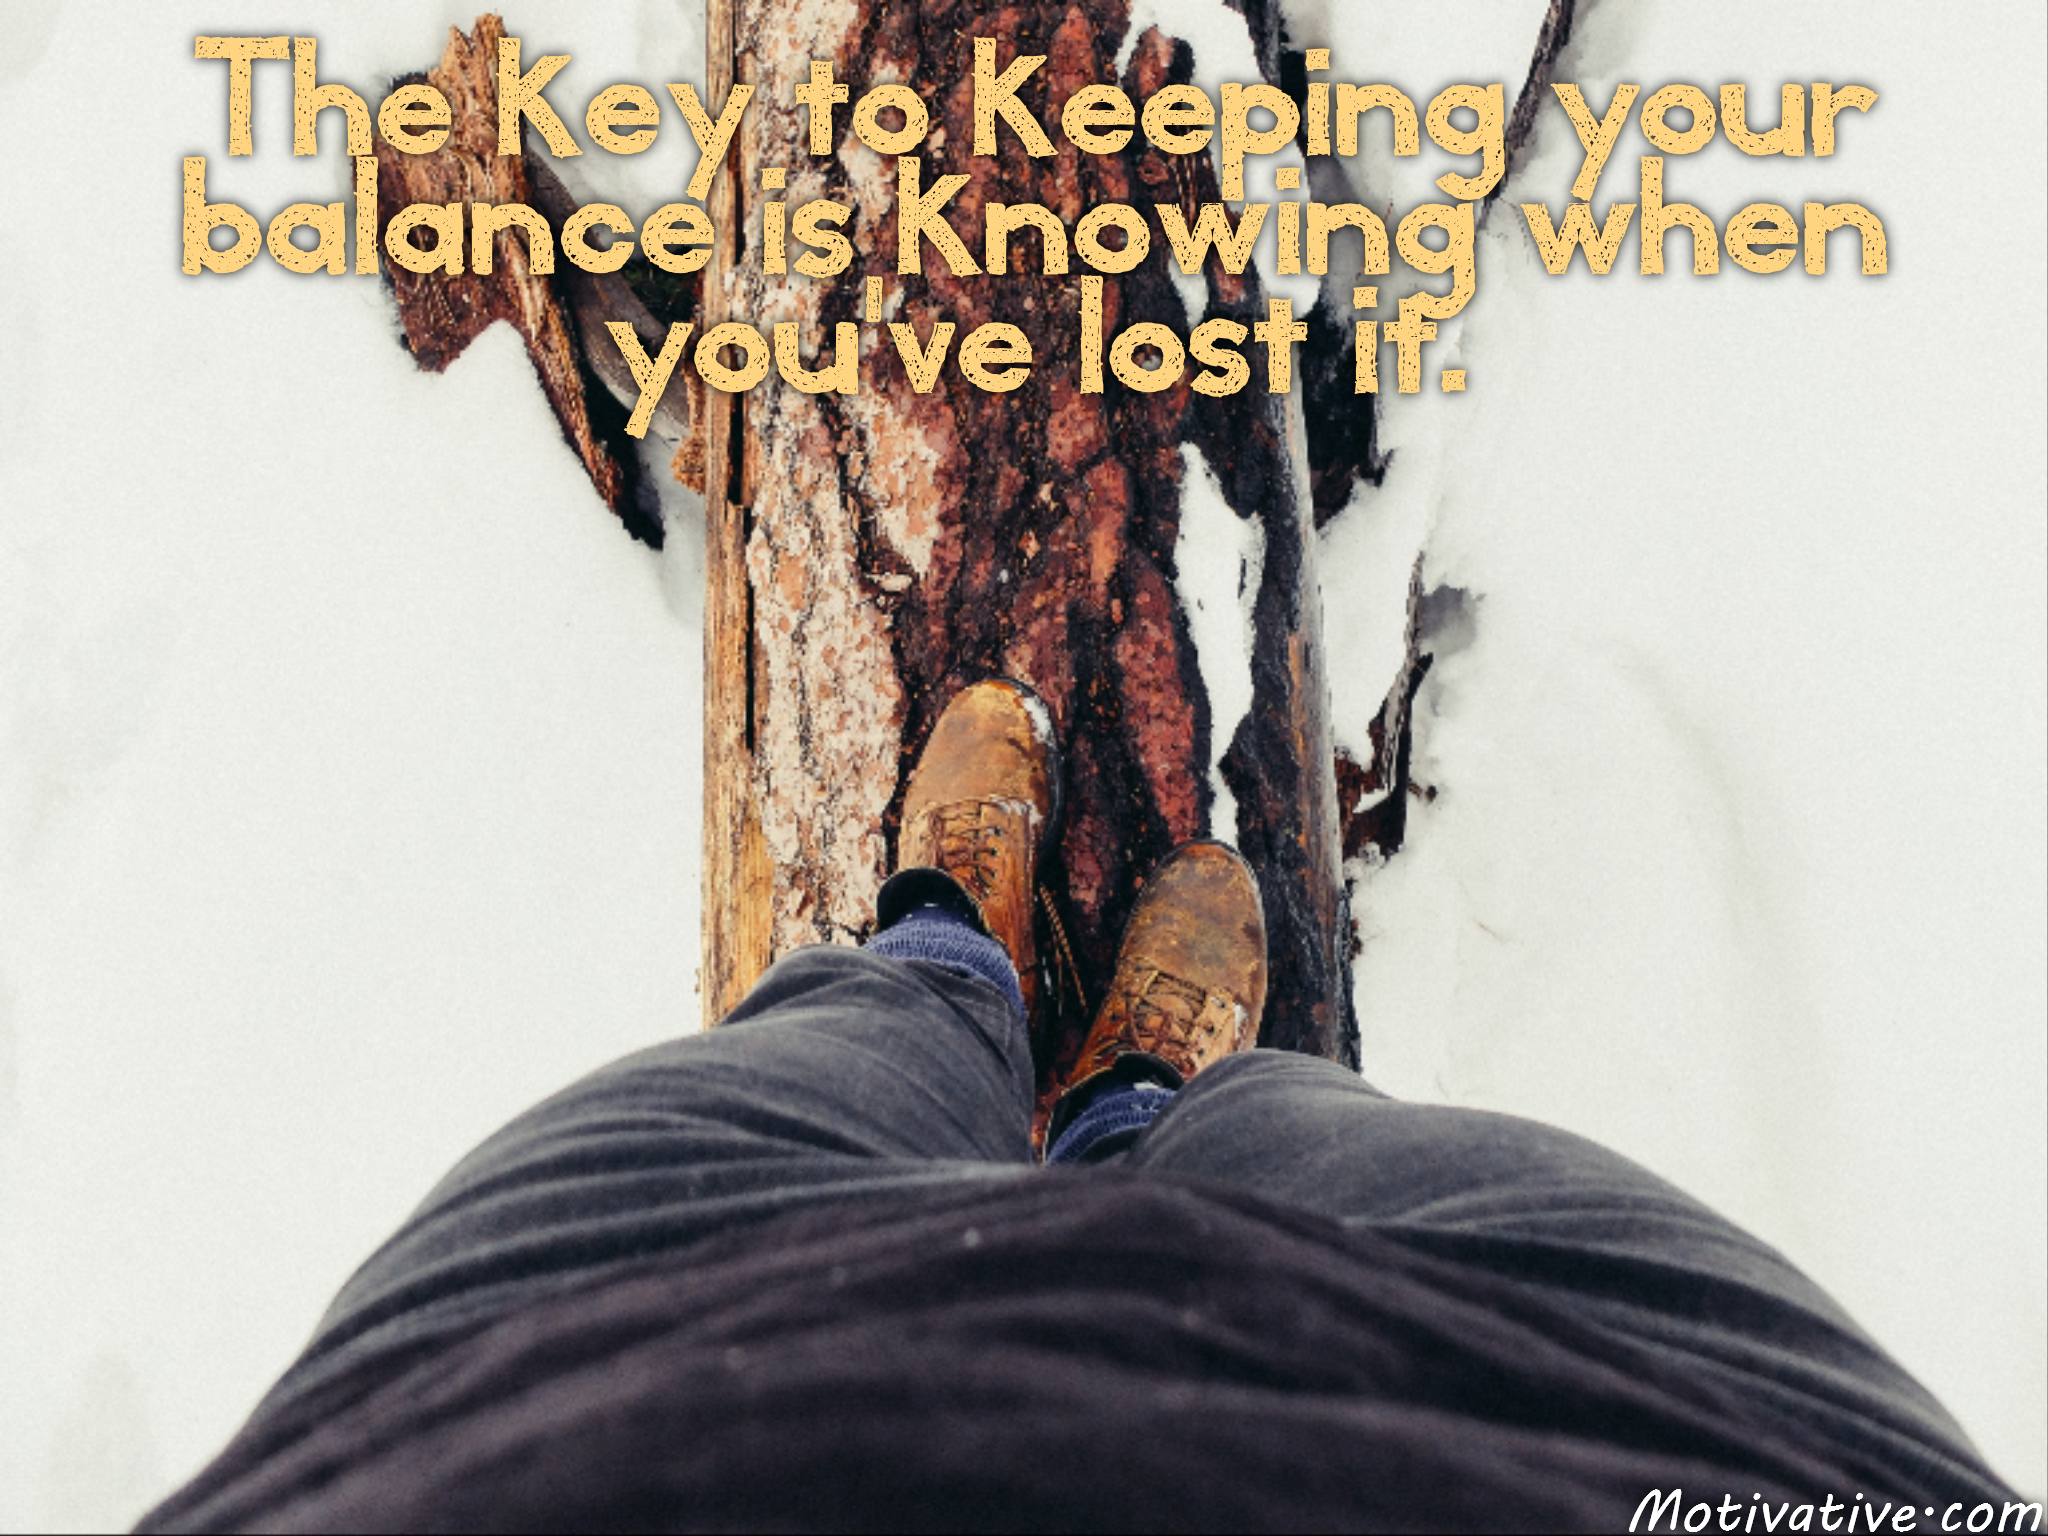 The key to keeping your balance is knowing when you’ve lost it.